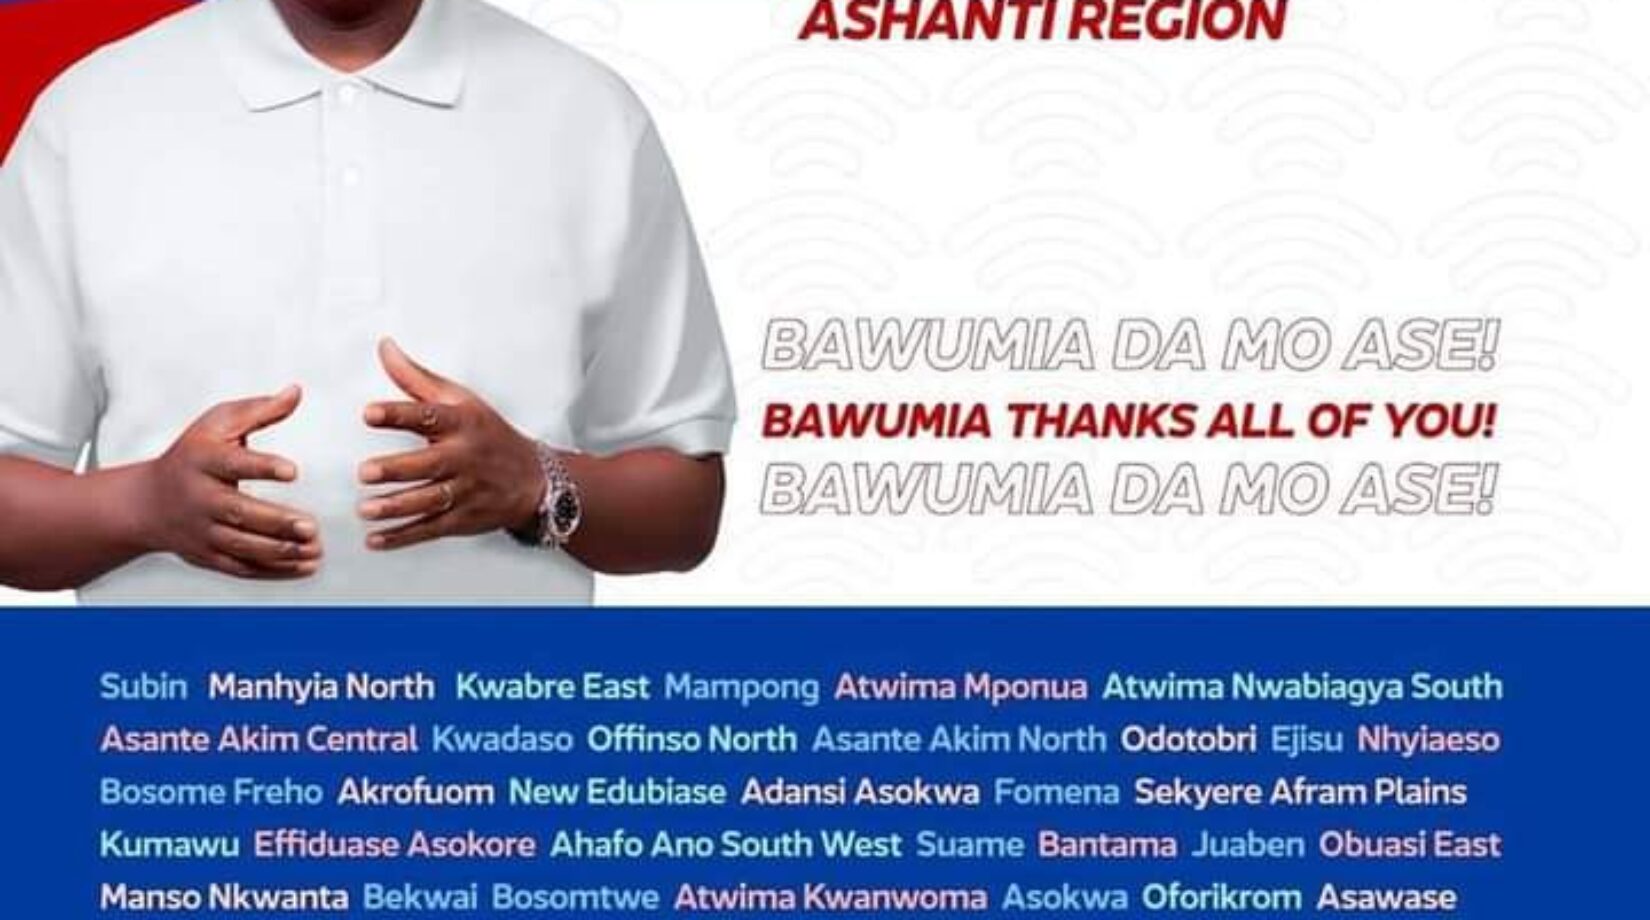 “THANK YOU FOR VOTING FOR OUR PREFERRED ASPIRANT” – ASH.REGION ELECTORAL AREA COORDINATORS TO MPs AND CHAIRMEN